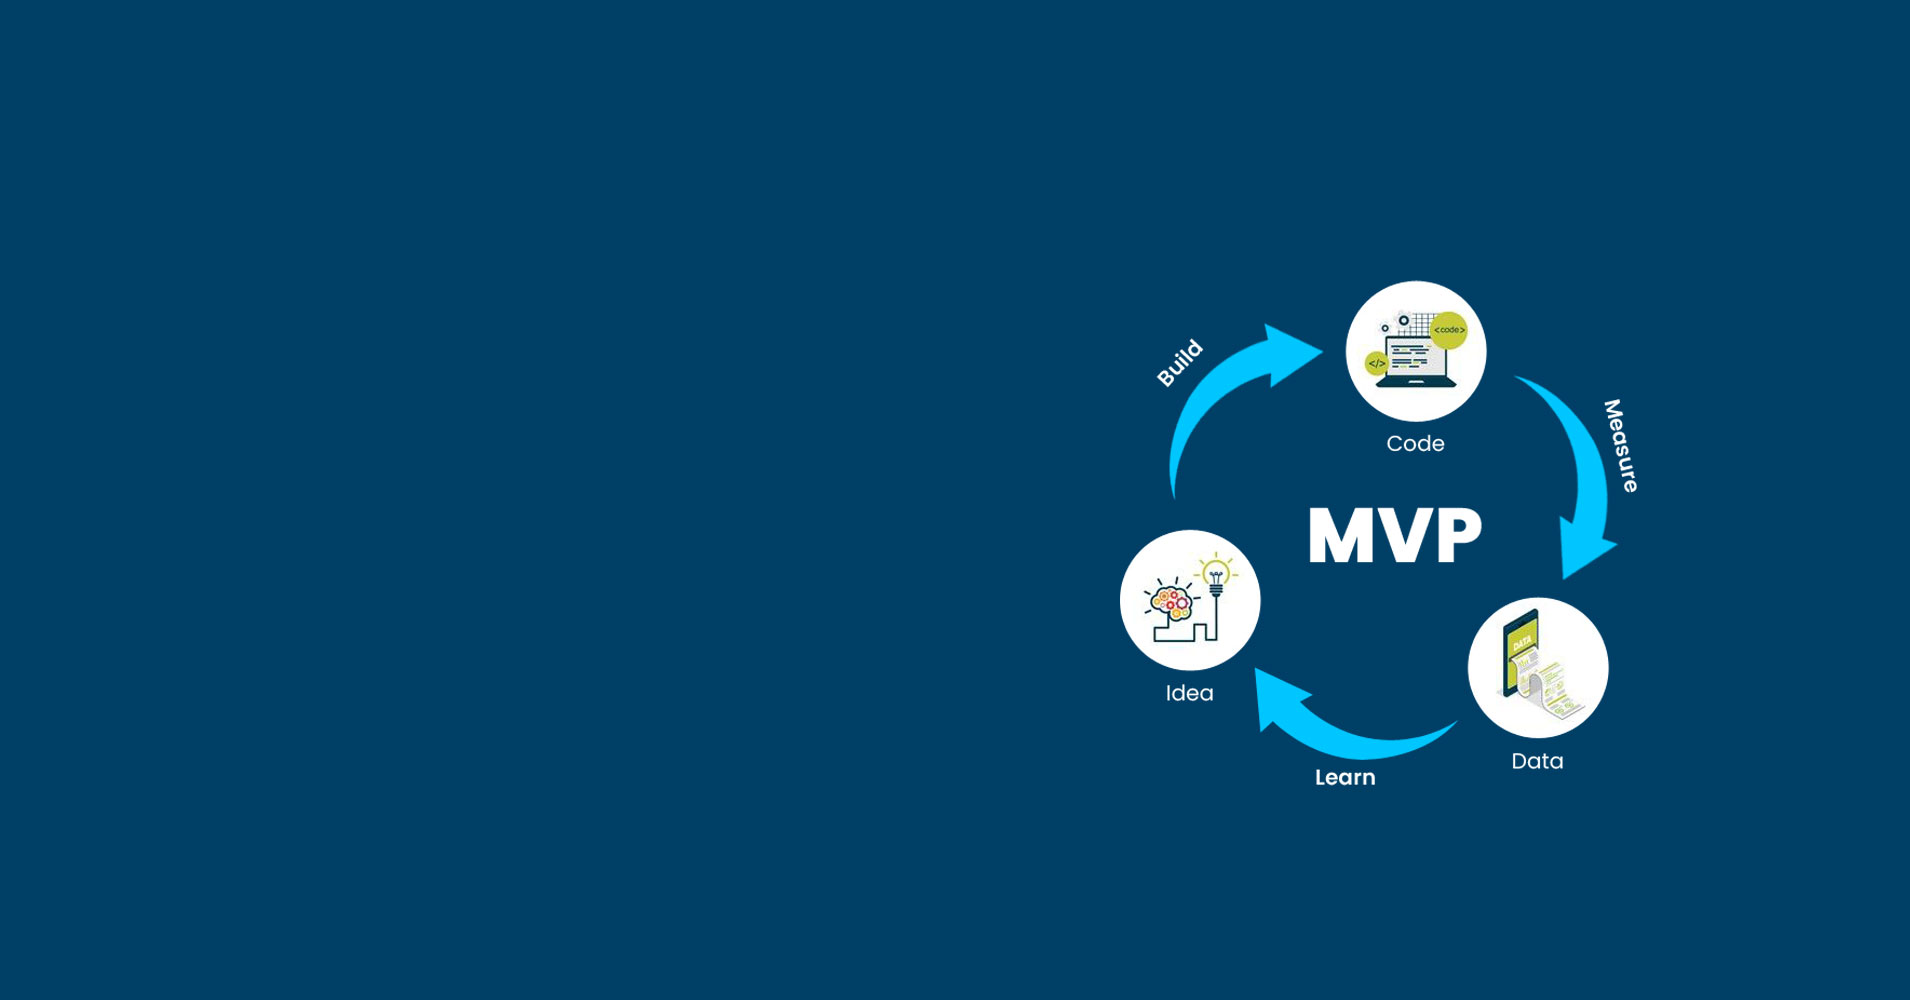 How to Build an MVP: A Step-by-Step Guide